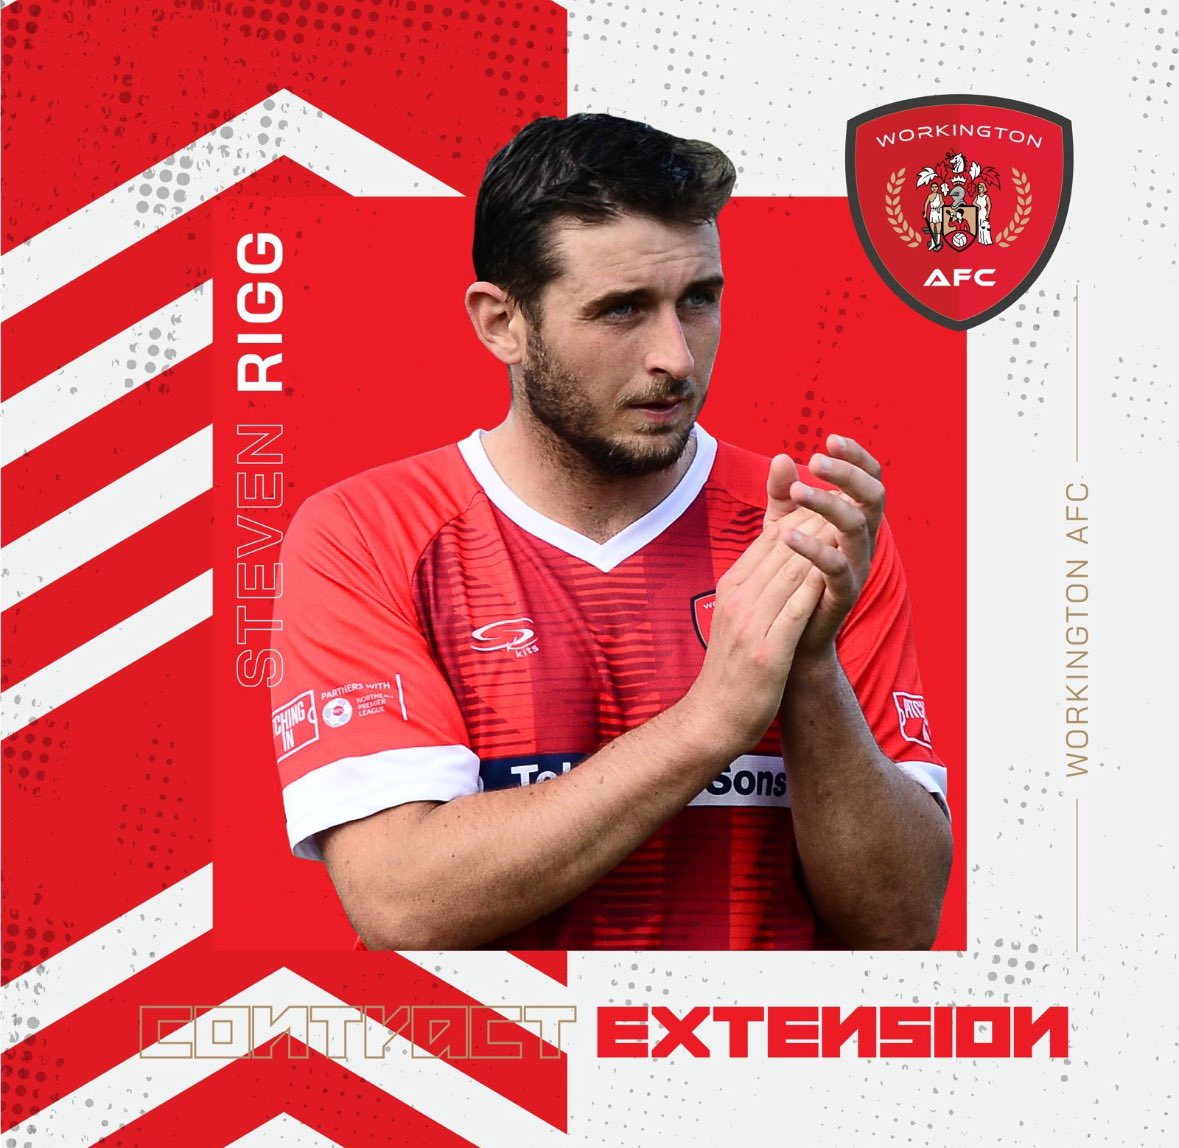 𝗥𝗶𝗴𝗴𝘆 𝗶𝘀 𝗮 𝗥𝗲𝗱 🔴 We are excited to confirm that Steven Rigg has re-signed with Workington AFC, bringing his talent and dedication back to the Reds for a 4th consecutive season 👊🏼 📰 shorturl.at/PwqDU #RichHistoryBrightFuture #RedsRiseAgain